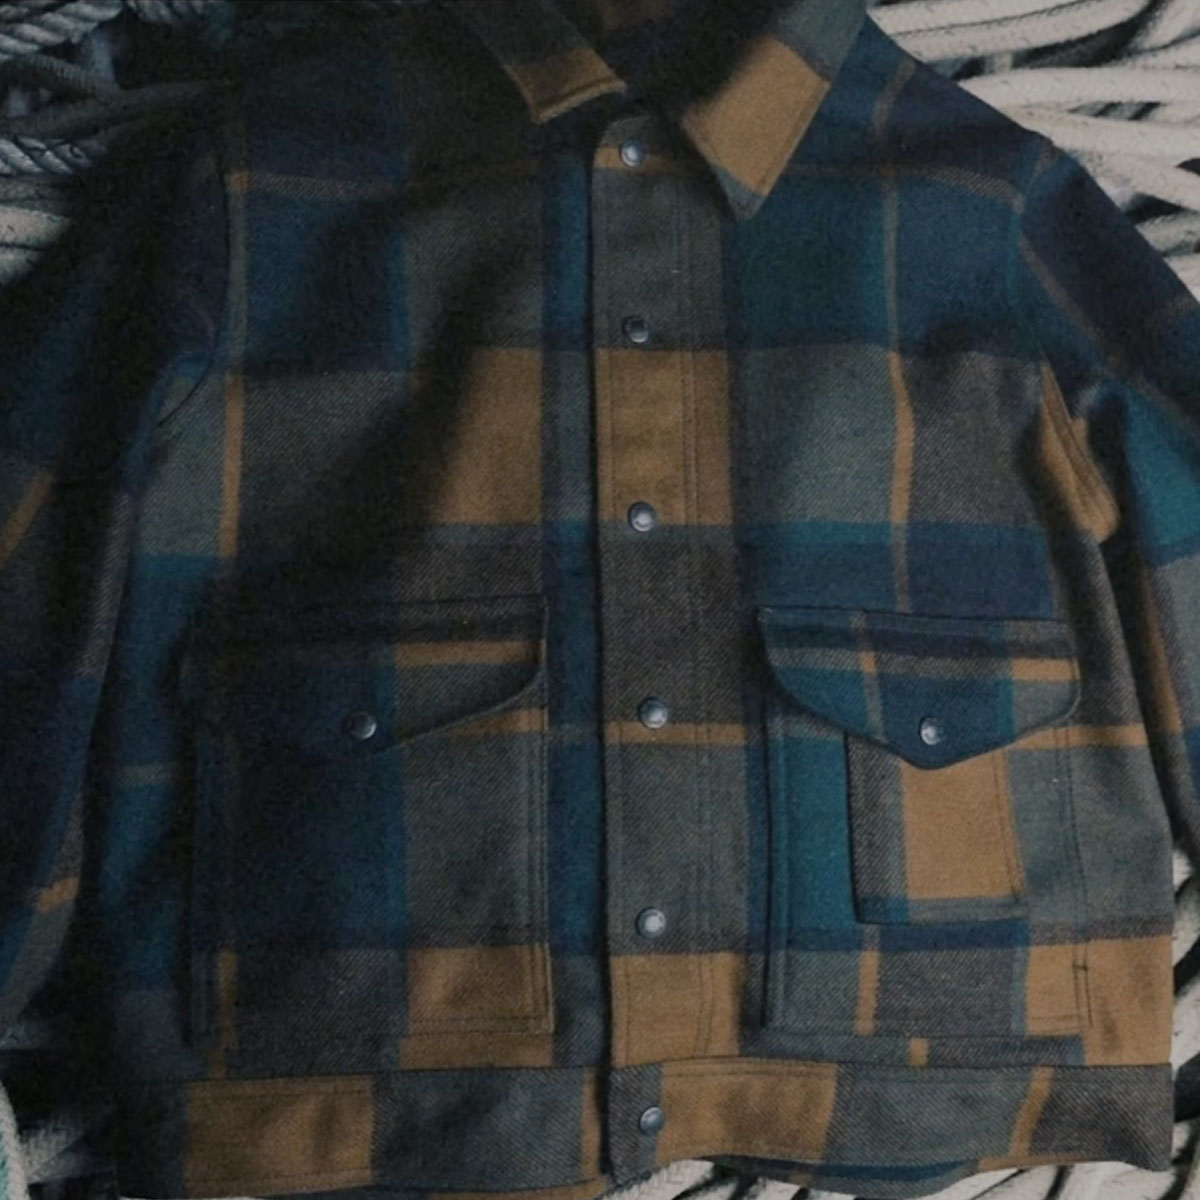 Filson Mackinaw Wool Work Jacket Pine Black Plaid, this classic jacket is a true tool for every outdoorsman.